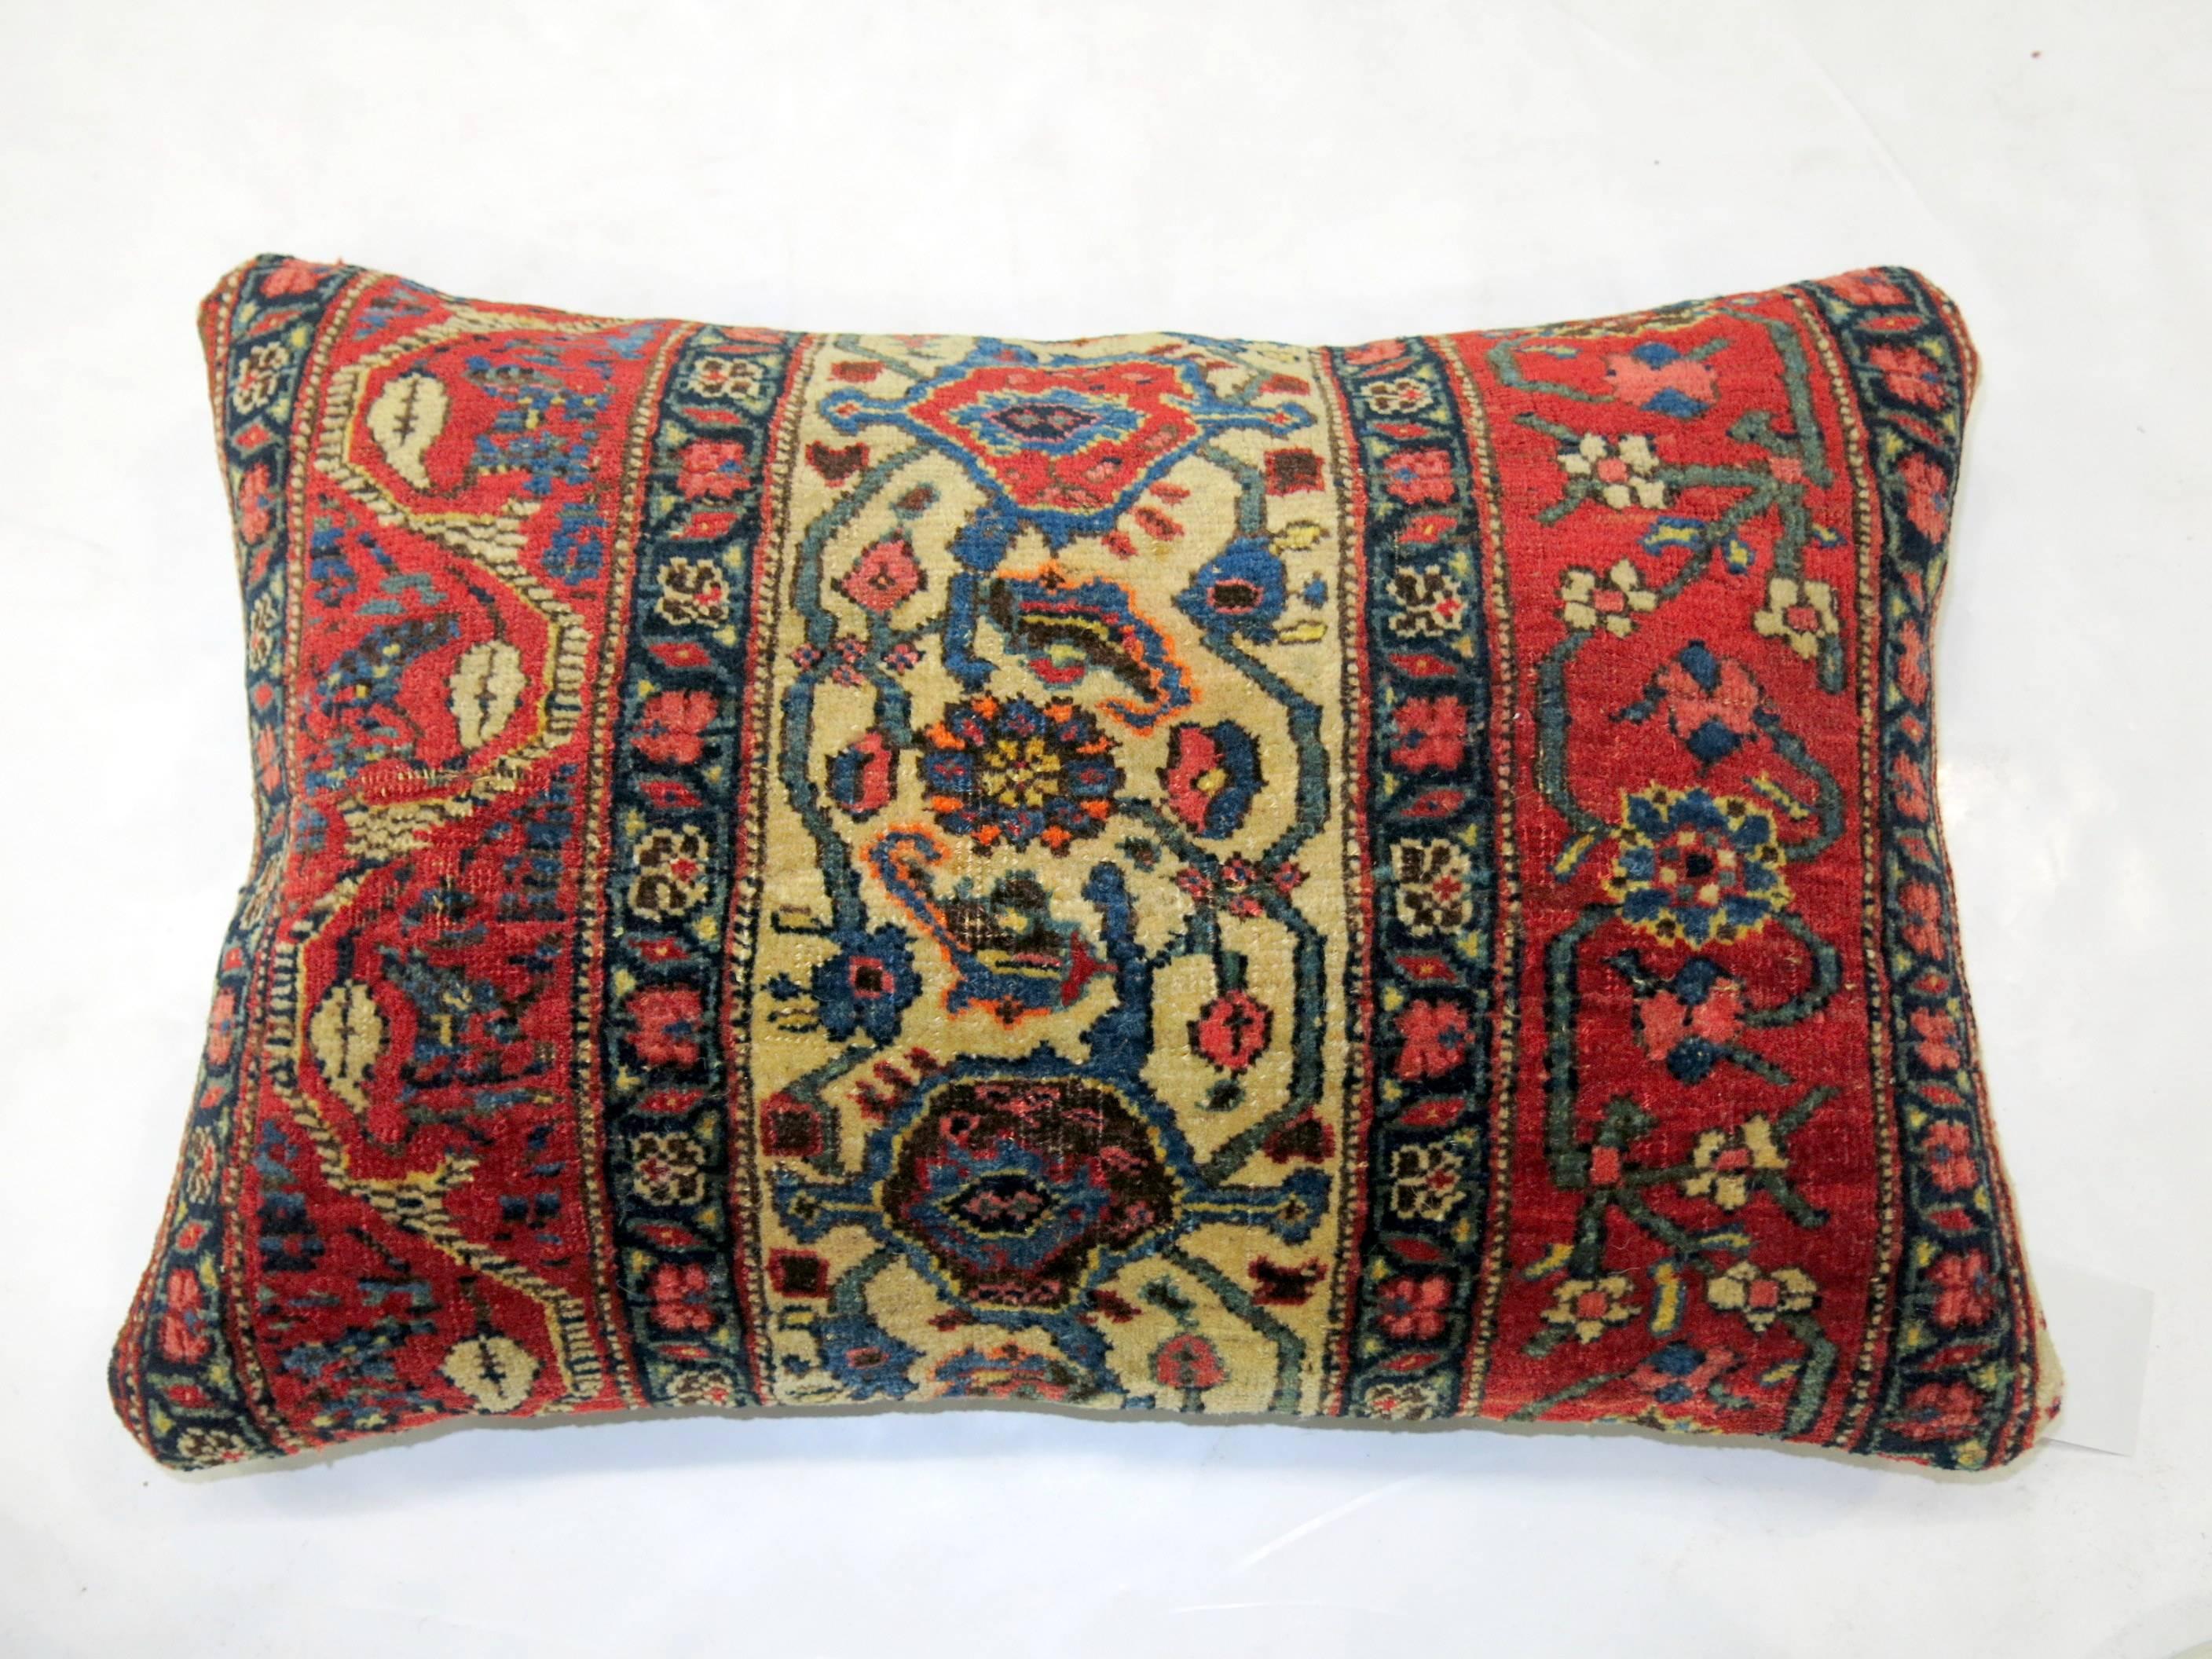 Pair of pillows made from an early 20th century Persian Bidjar rug with blue cotton backing. Each pillow measures 16” x 24”.